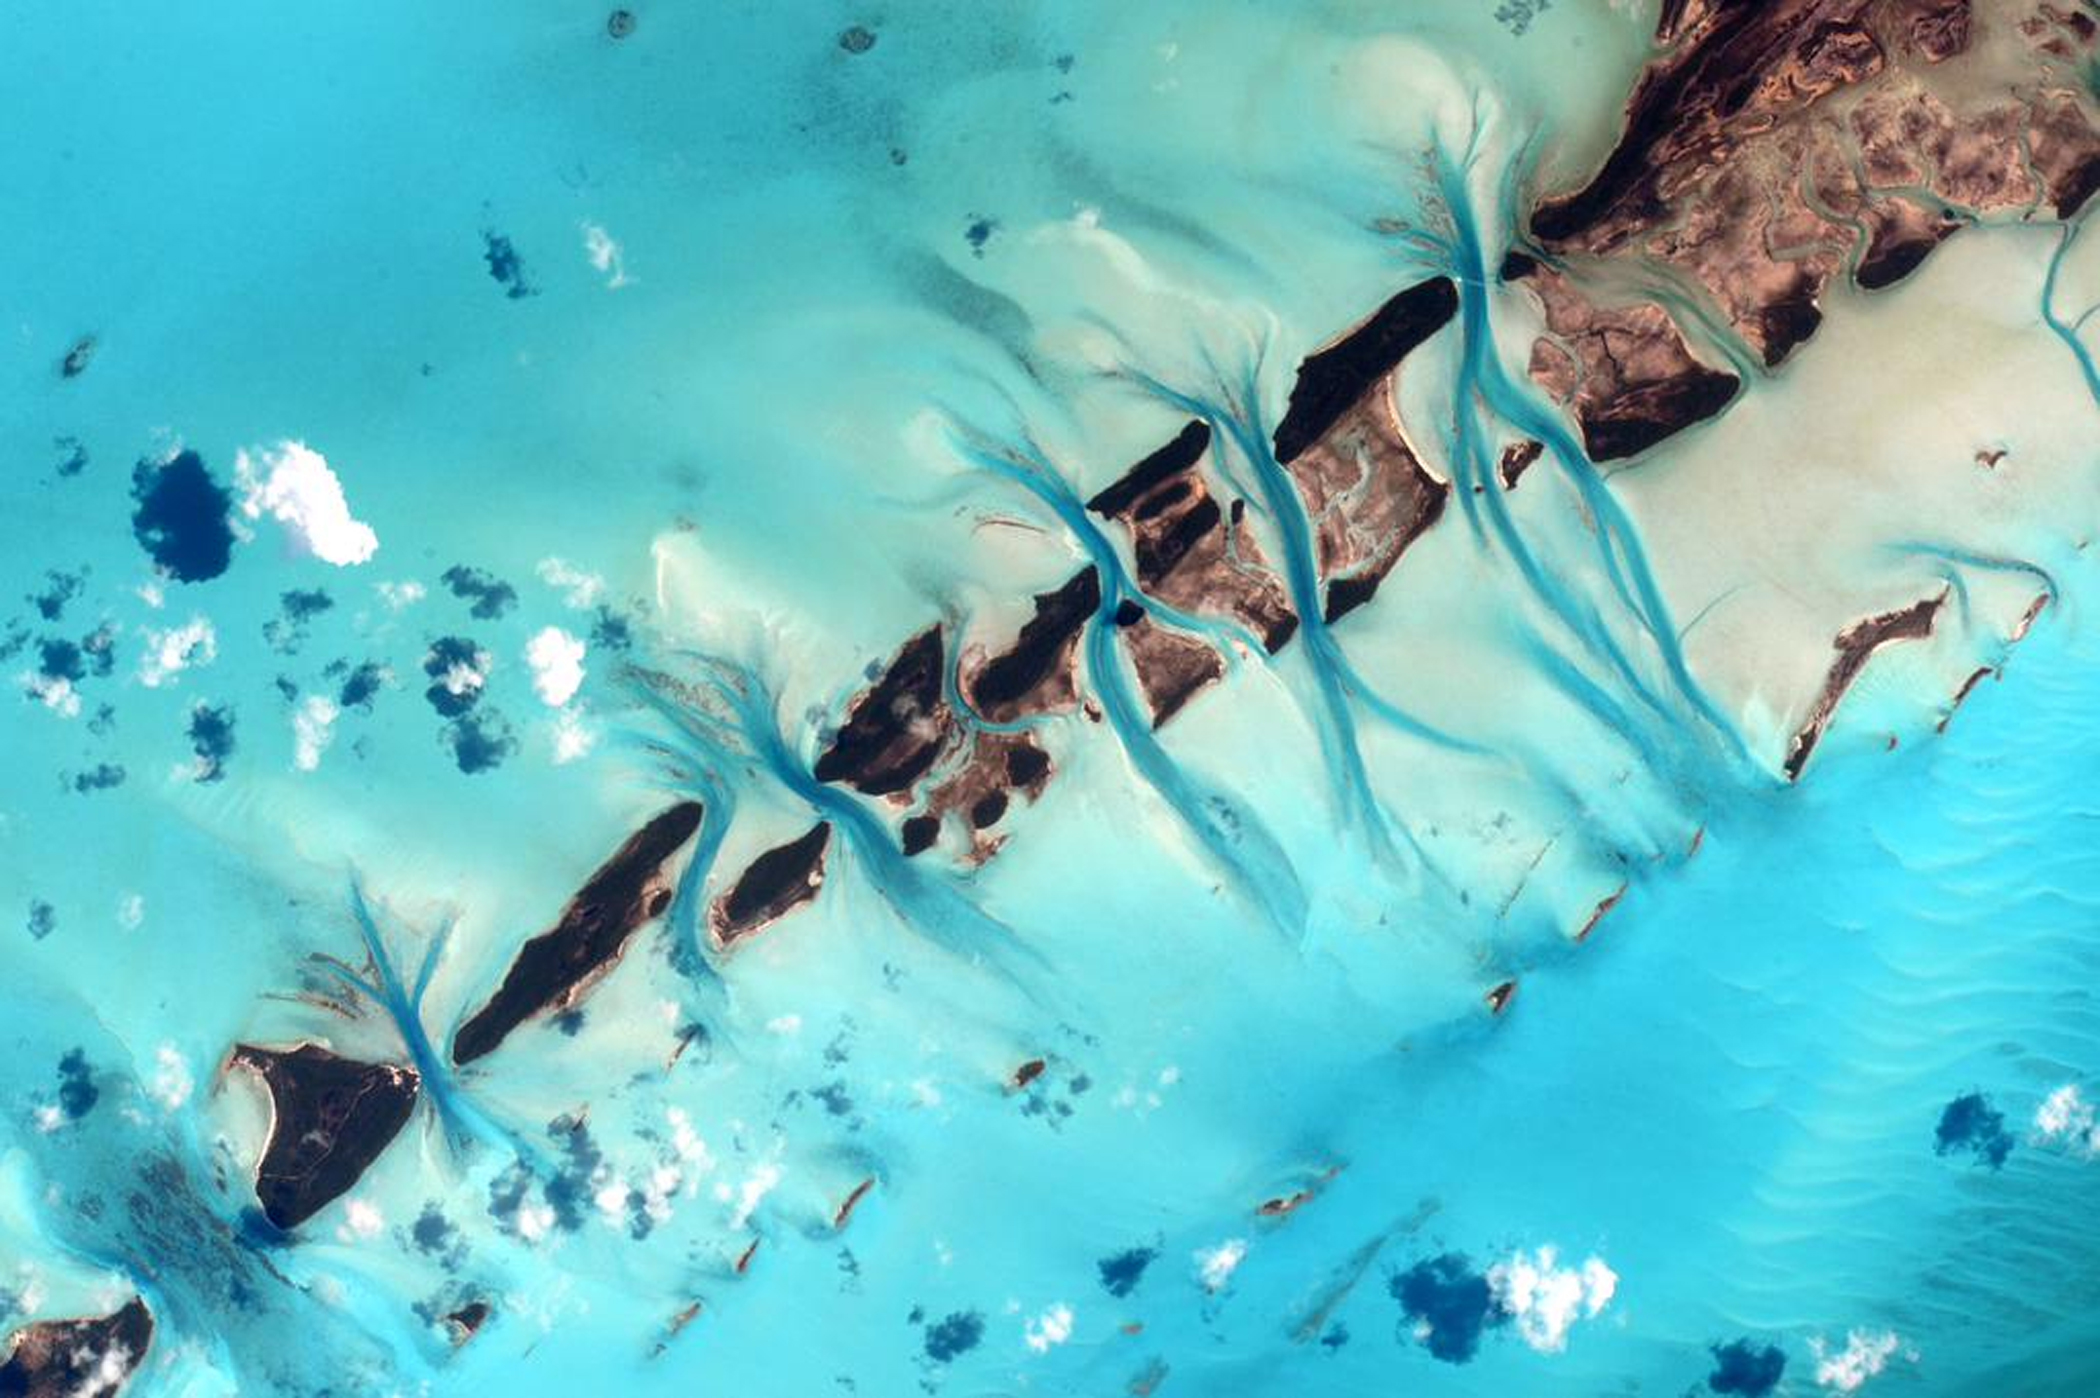 Astronaut Scott Kelly captured this image of the Bahamas from the International Space Station on July 19, 2015.